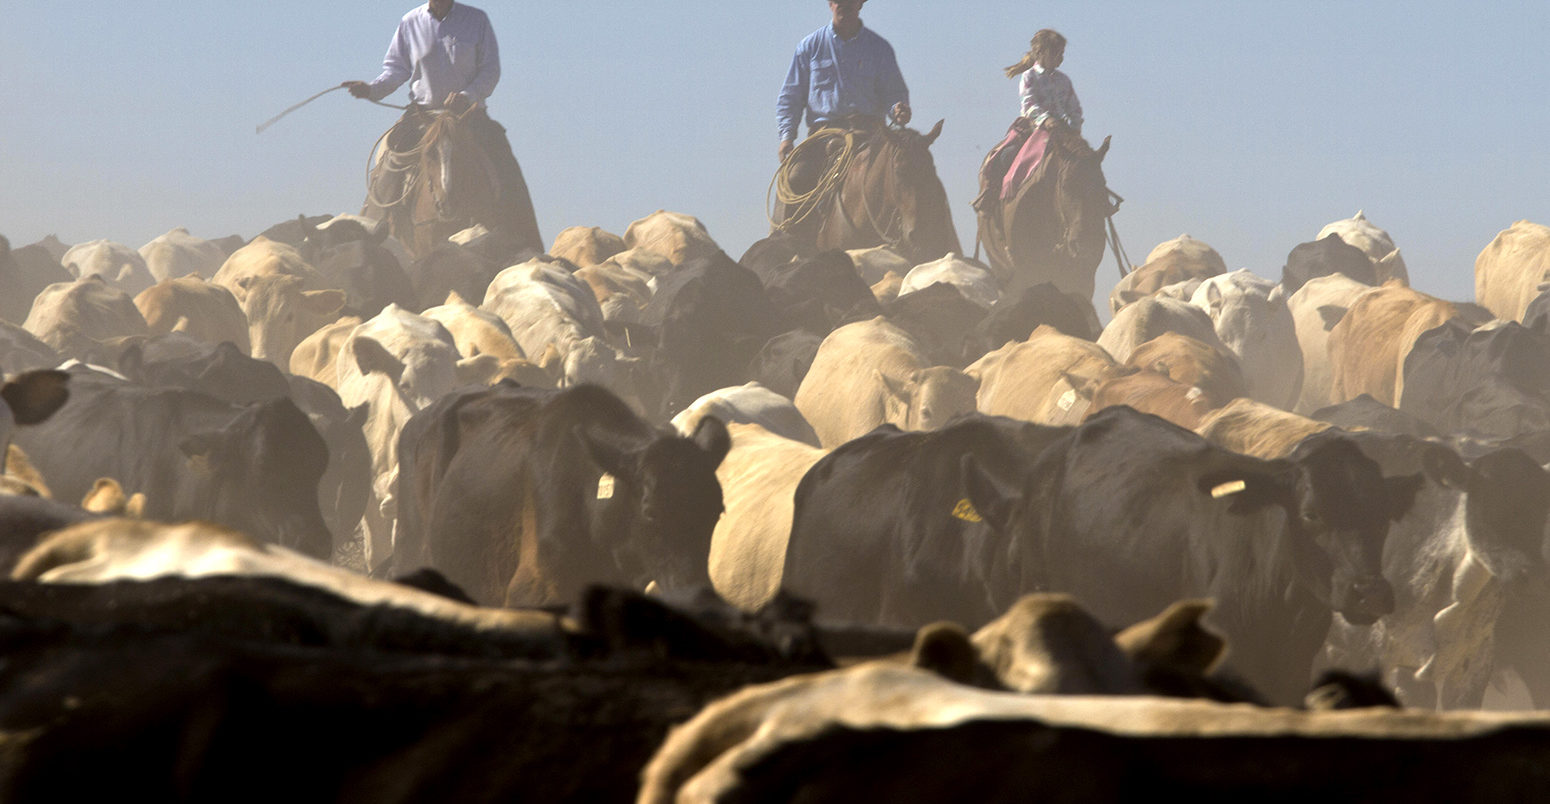 Cattle round-up before shipping on a West Texas ranch. Credit: Luc Novovitch / Alamy Stock Photo. MDHE8J